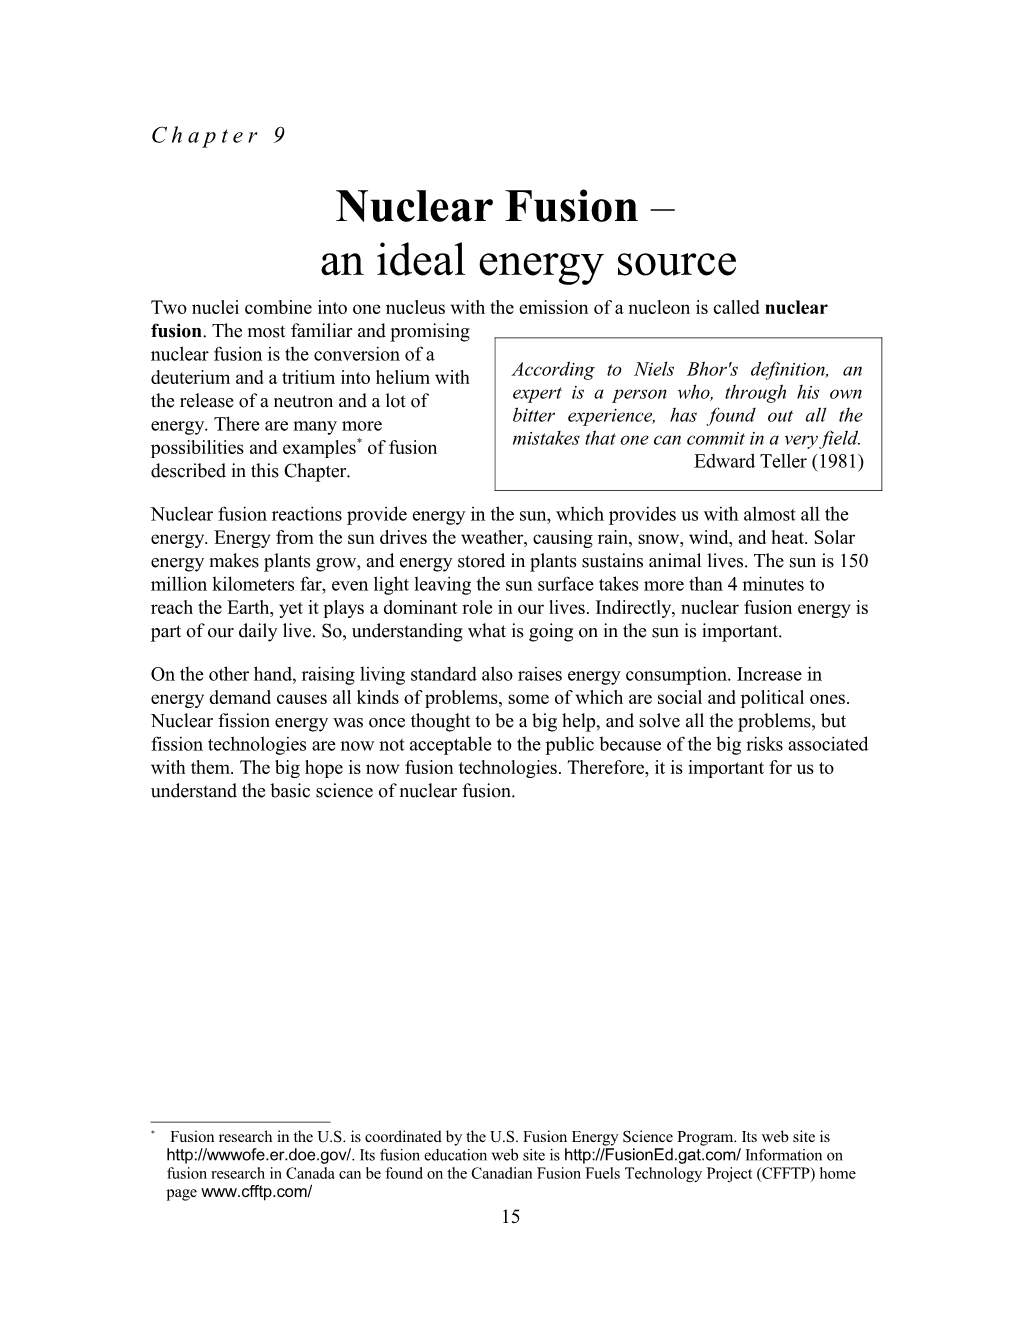 Nuclear Fusion an Ideal Energy Source